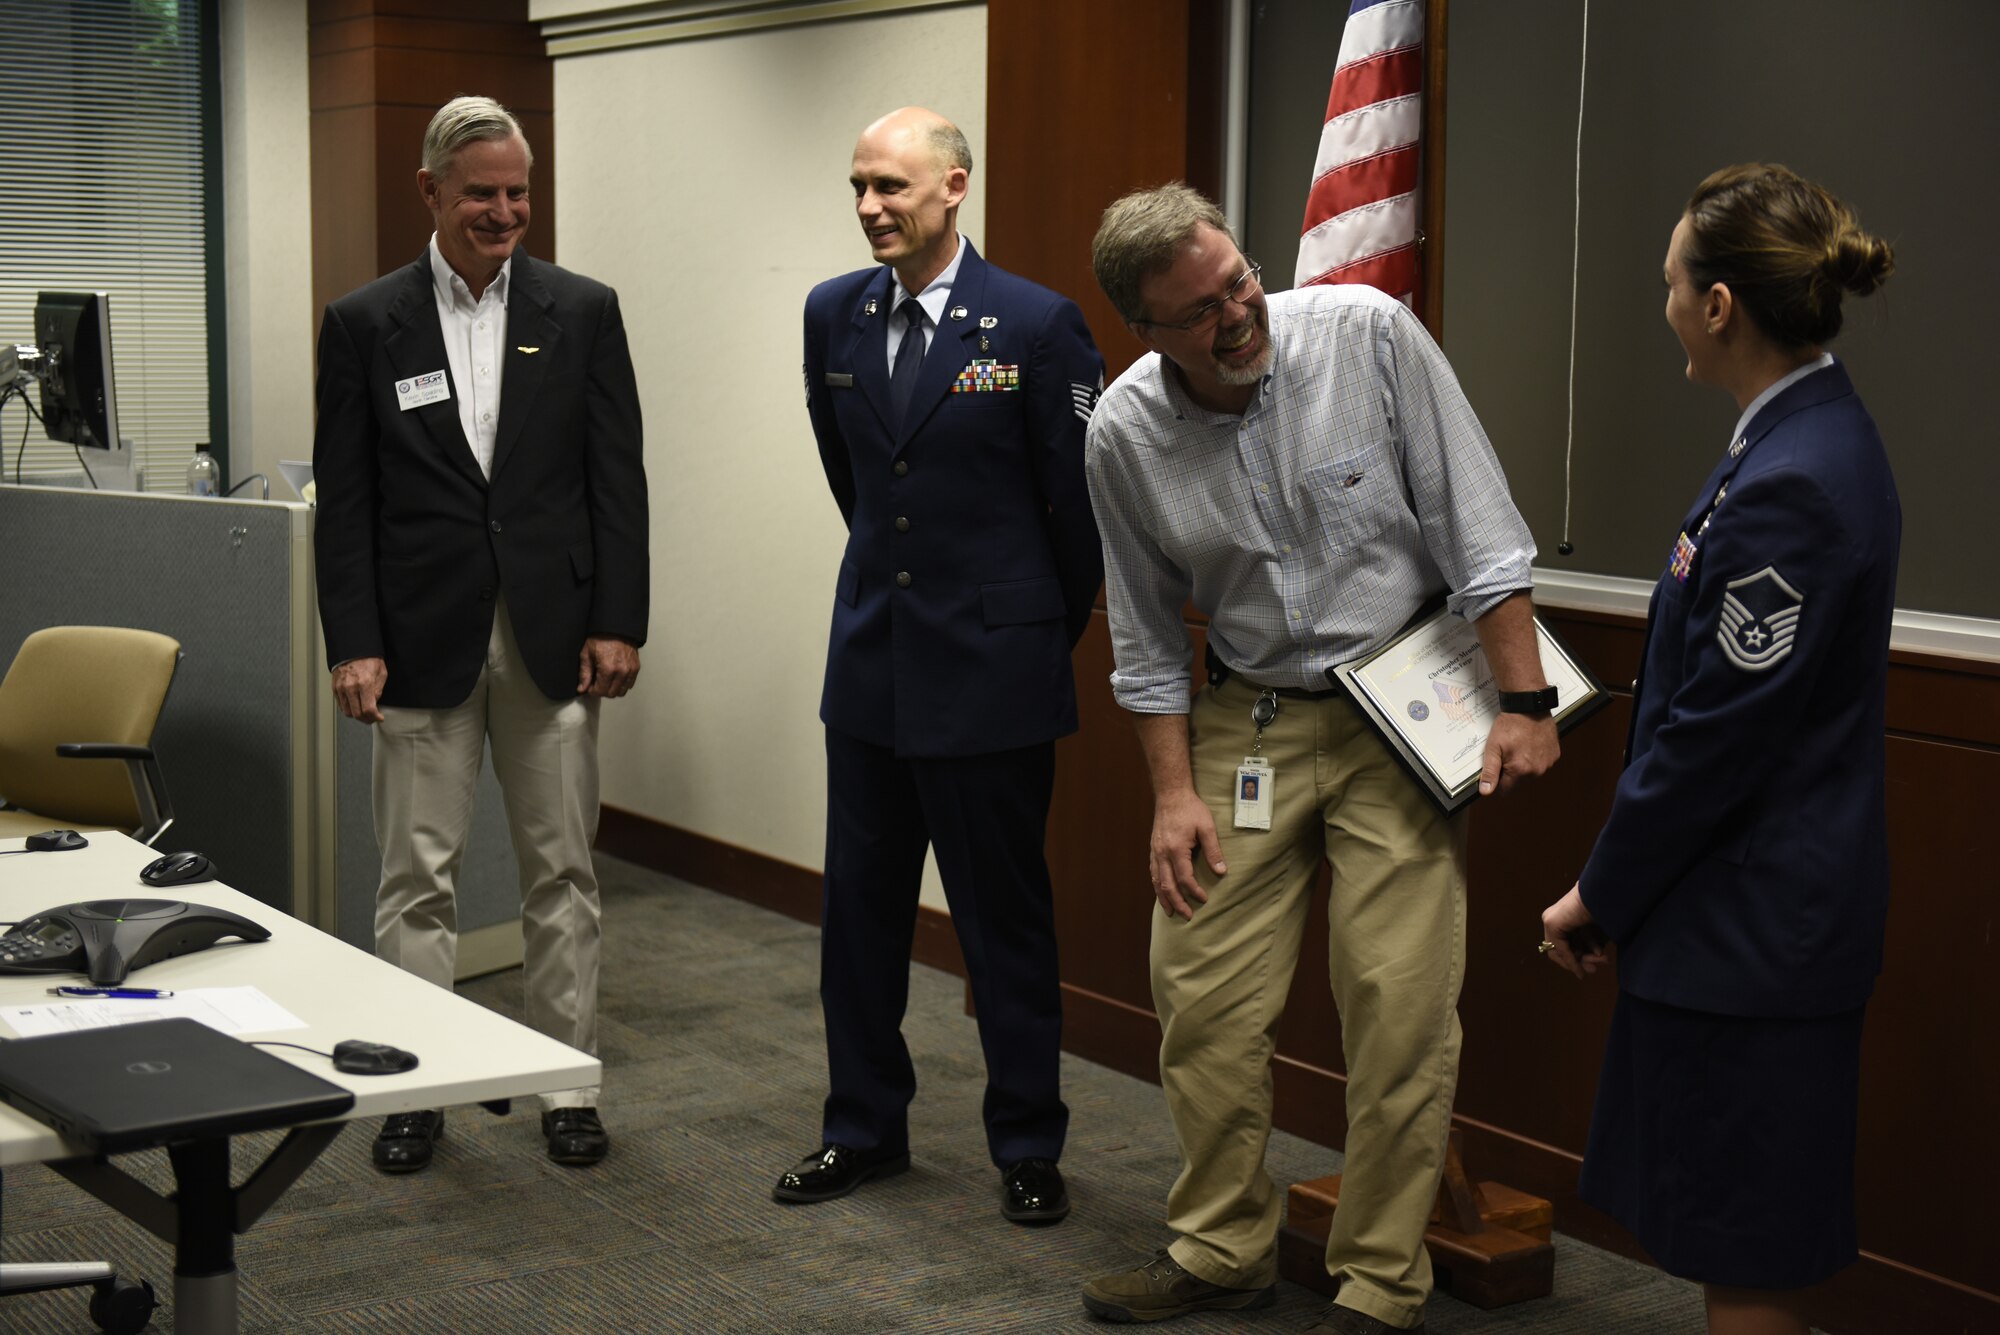 From left to right Mr. Kevin Spalding Area Chair with the North Carolina ESGR, U.S. Air Force Tech. Sgt. Stacey Wakefield of the 156th Aeromedical Evacuation Squadron, Mr. Chris Mendlik Wells Fargo Information Security Manager, and Master Sgt. Sara Evans with the 131st Bomb Wing laugh after Mr. Mendlik was surprised by a ceremony to present the ESGR Patriotic Employer Award at the Wells Fargo Charlotte Customer Information Center, NC, June 14, 2019. The Patriotic Employer Award is the first level that an employer can be nominated for, and reflects the efforts made to support citizen warriors through a wide-range of measures including flexible schedules, time off prior to and after deployment, caring for families, and granting leaves of absence if needed.